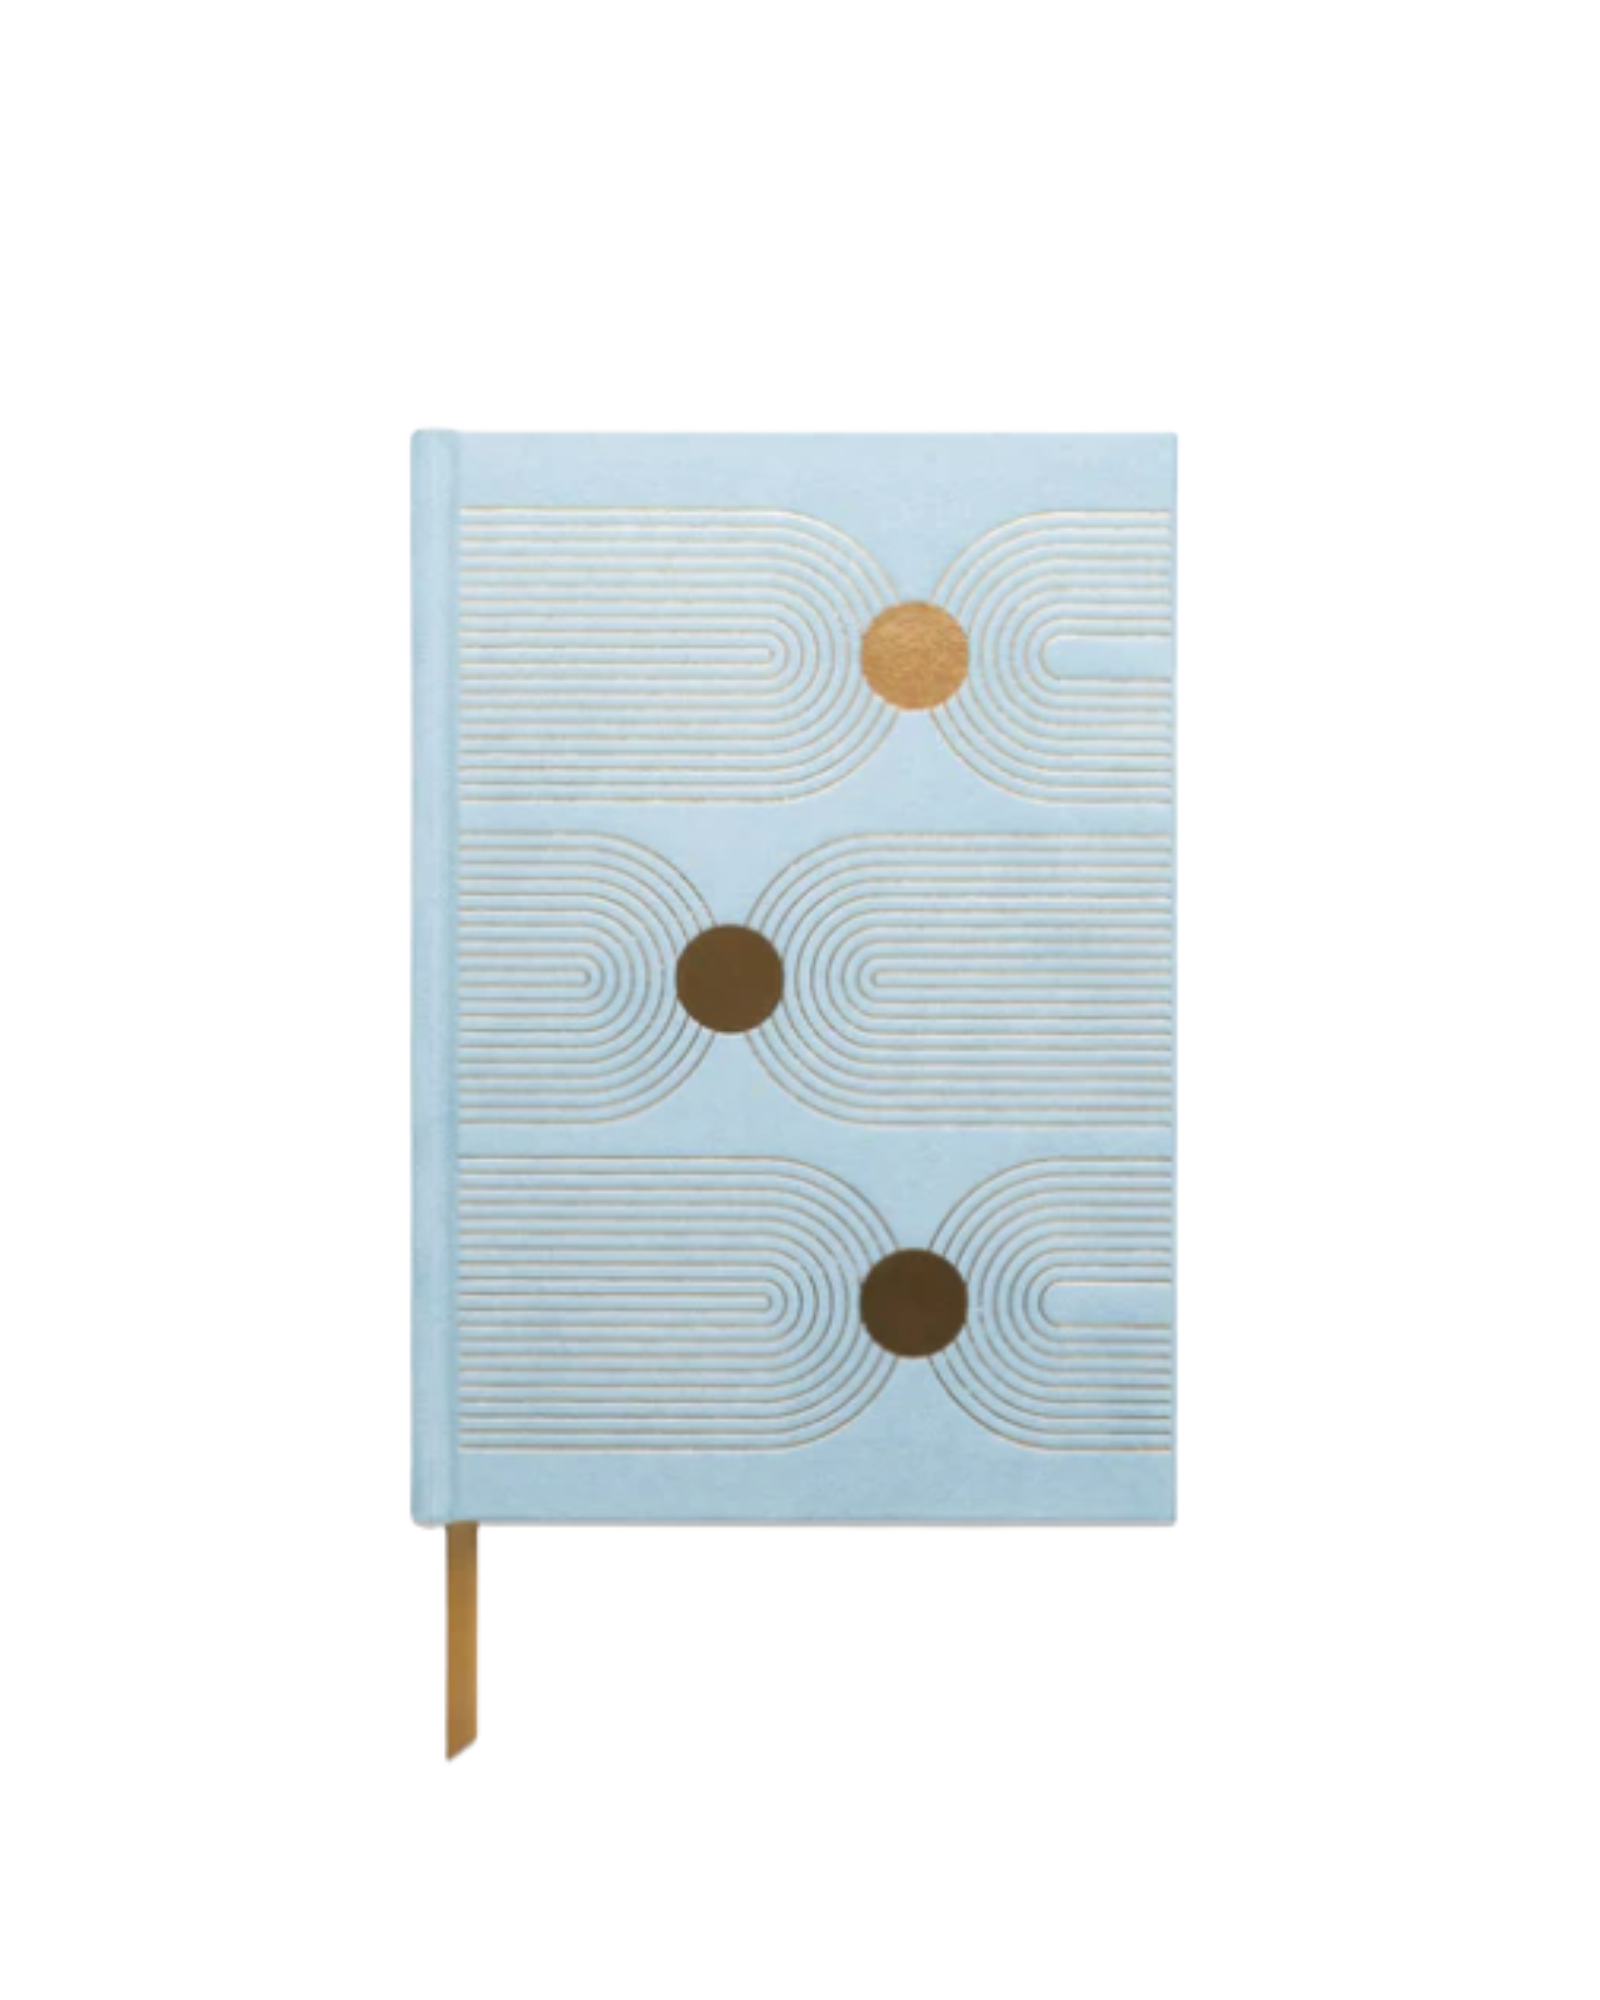 Rectangular journal with light blue suede cover and gold details